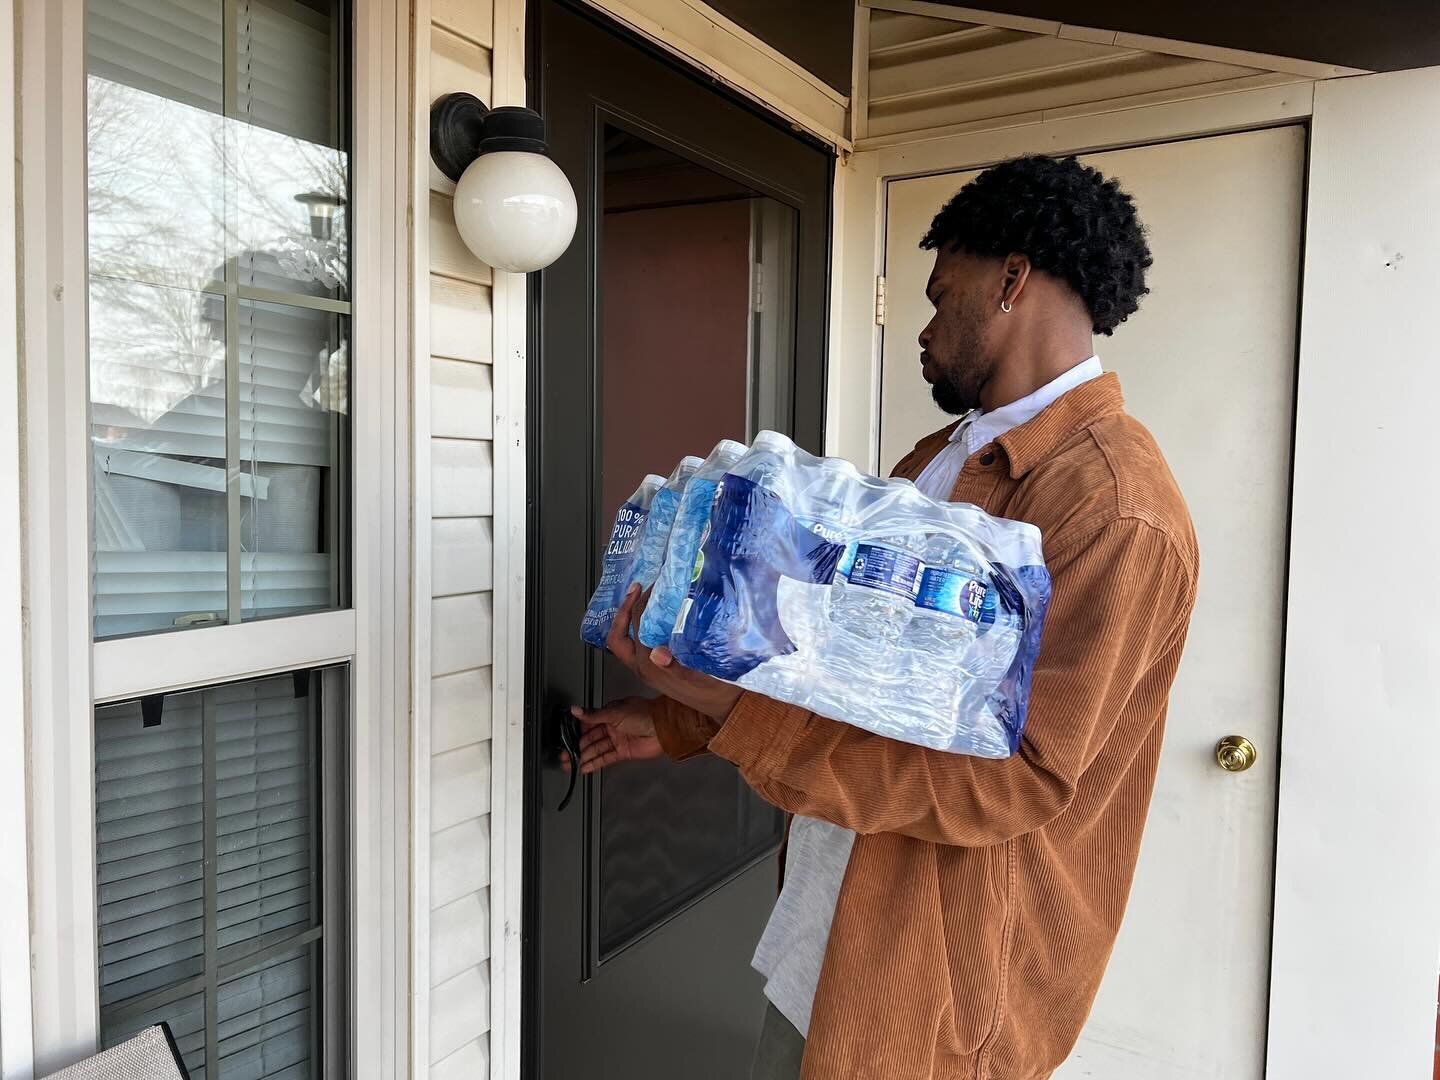 This week Delta Magic delivered water to the doors of every resident of 3 critical housing groups: Helena Housing Authority, Christopher Homes, and Twin City Manor Apartments. Special thanks to UAMS East, Jacob Moneymaker, and our own Delta Magic Boa